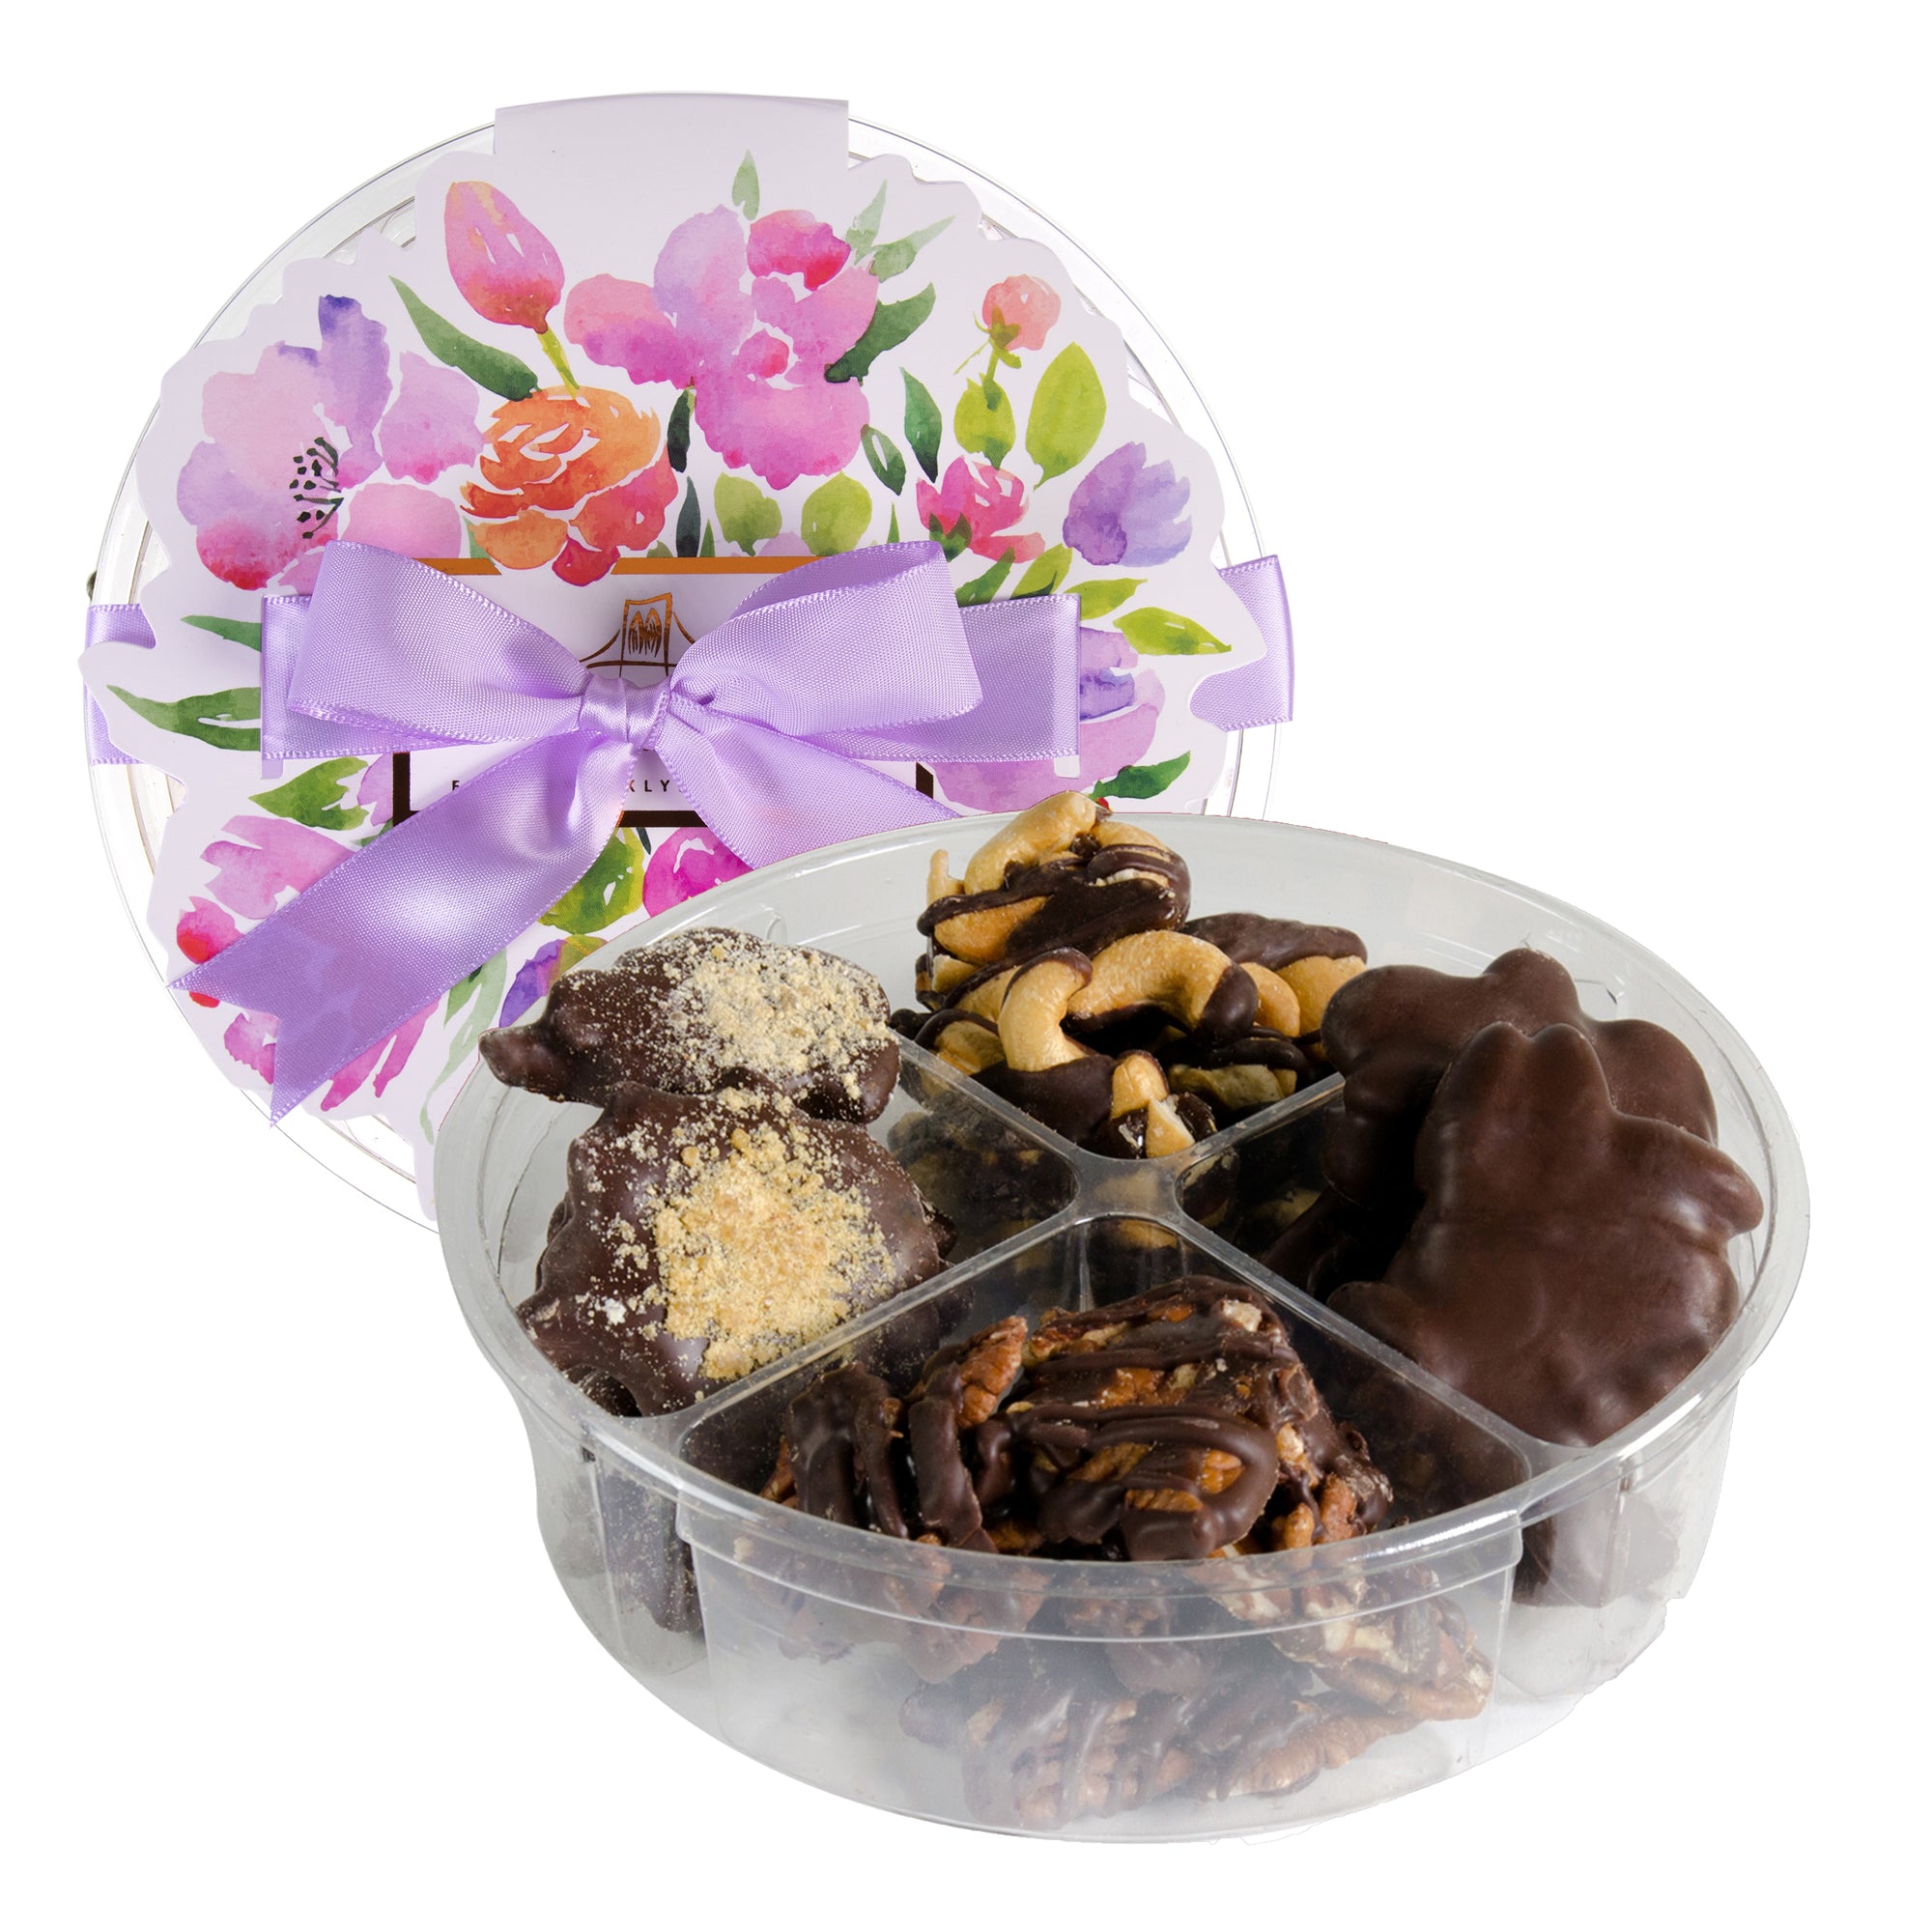 Experience the Taste of Brooklyn with Our Handcrafted Chocolate Nut Clusters - A Perfect Gift for the Chocolate-Loving Moms in Your Life!